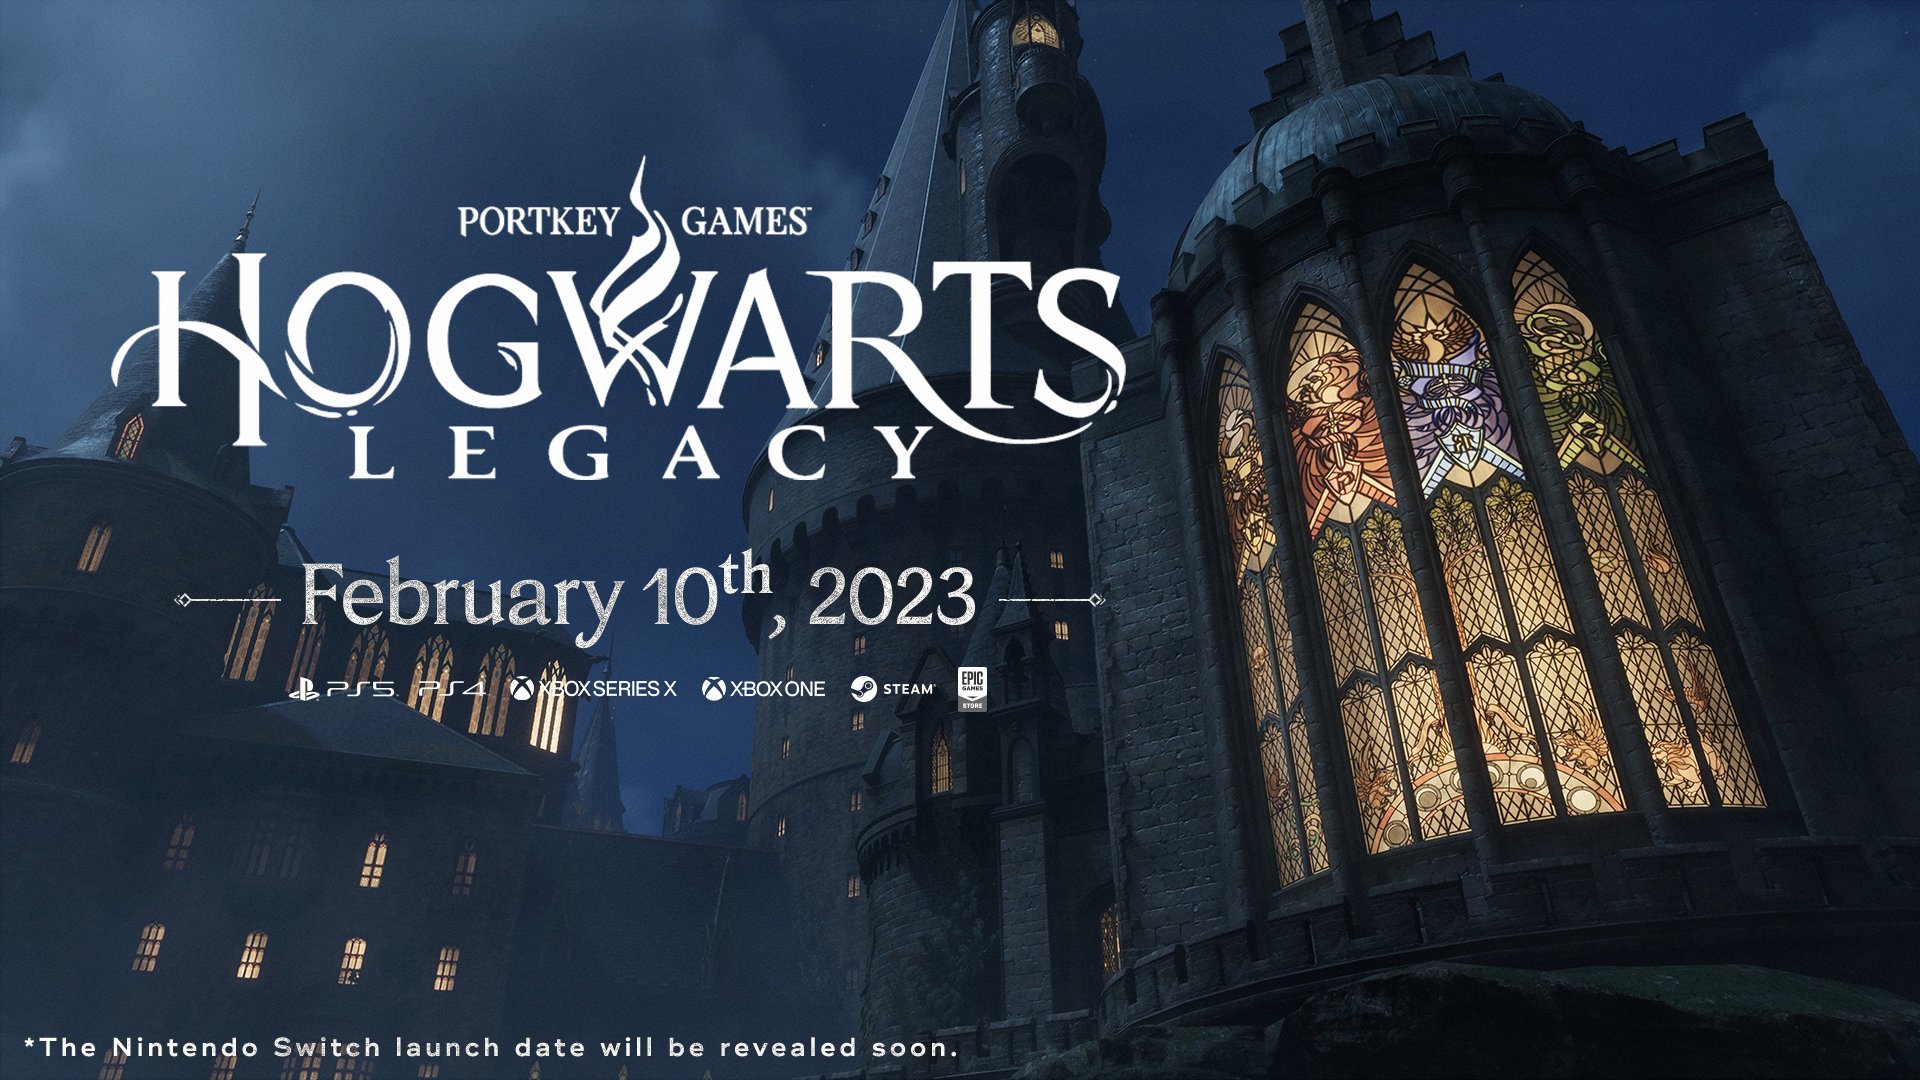 Hogwarts Legacy PS4 Release Date Delayed, Xbox One Too